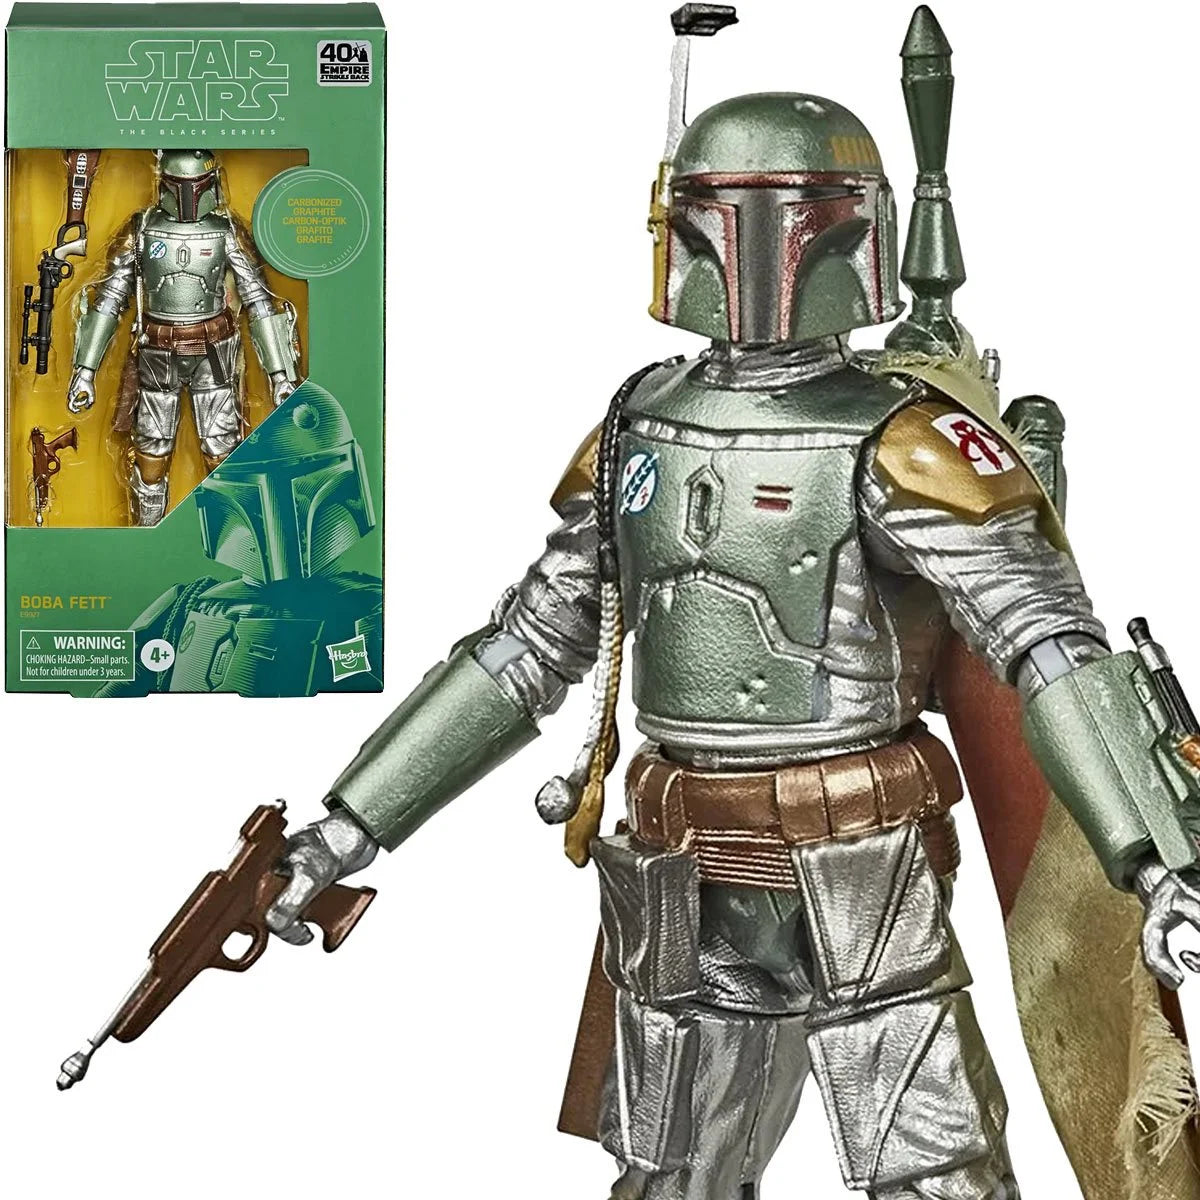 Boba Fett - Star Wars: The Black Series Carbonized Collection 6" Action Figure